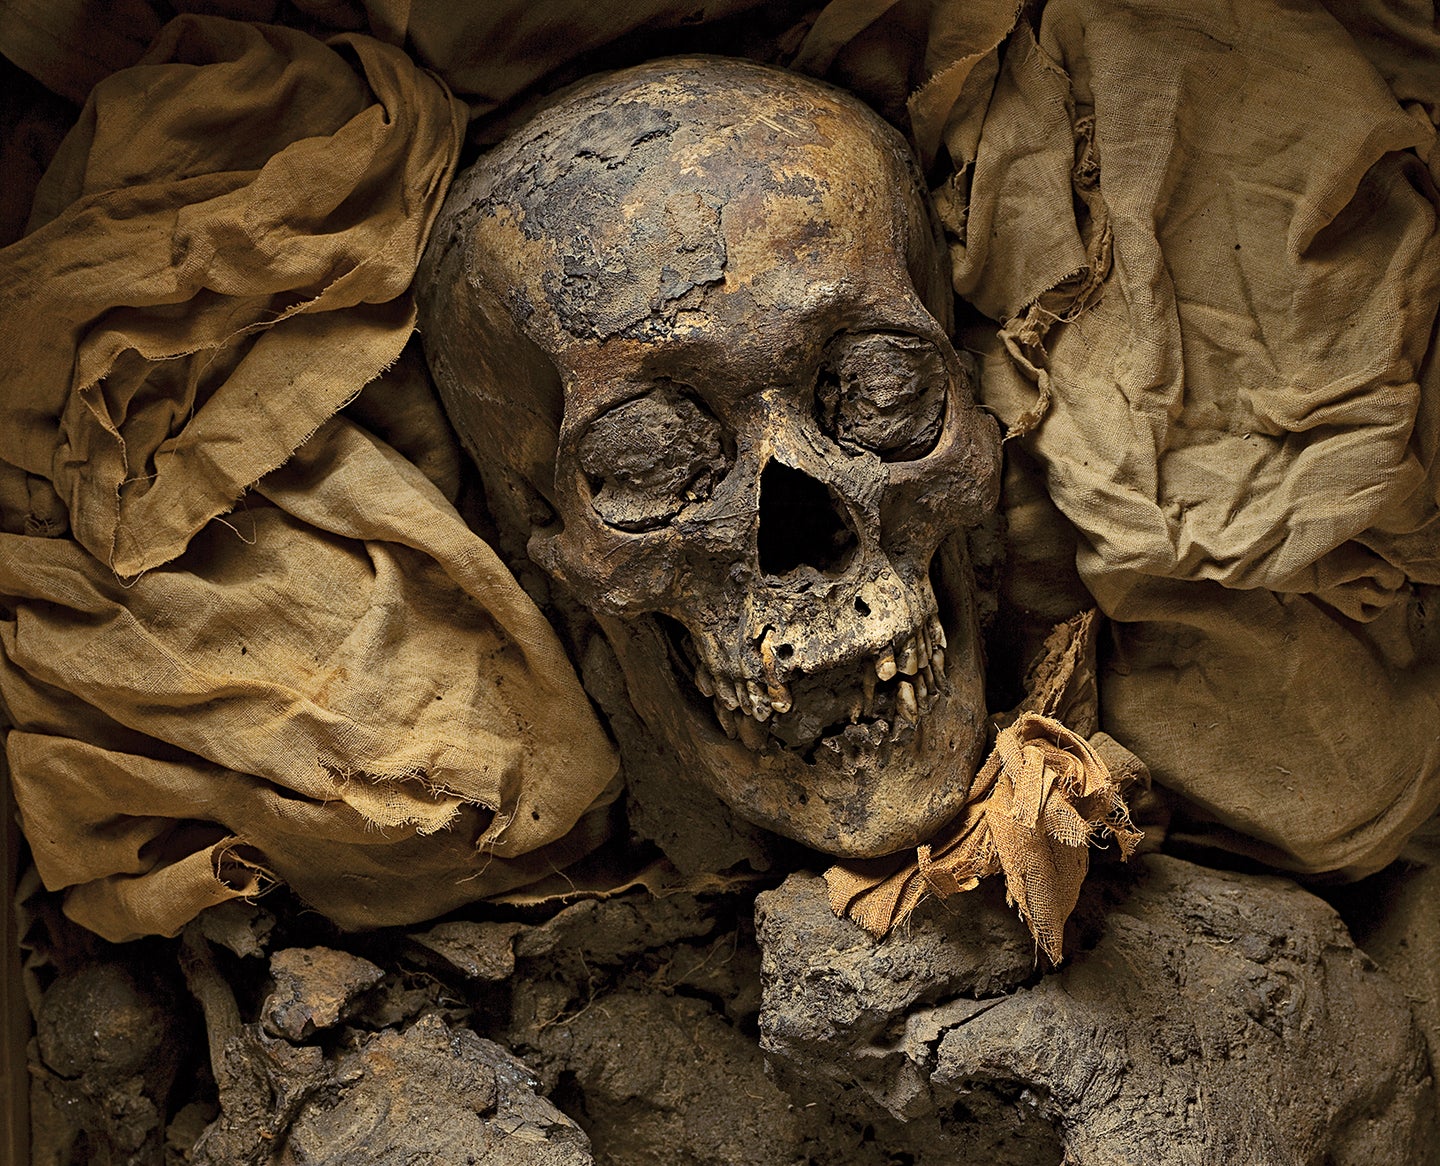 This mummy was once Amenhotep III, King Tut's grandfather.